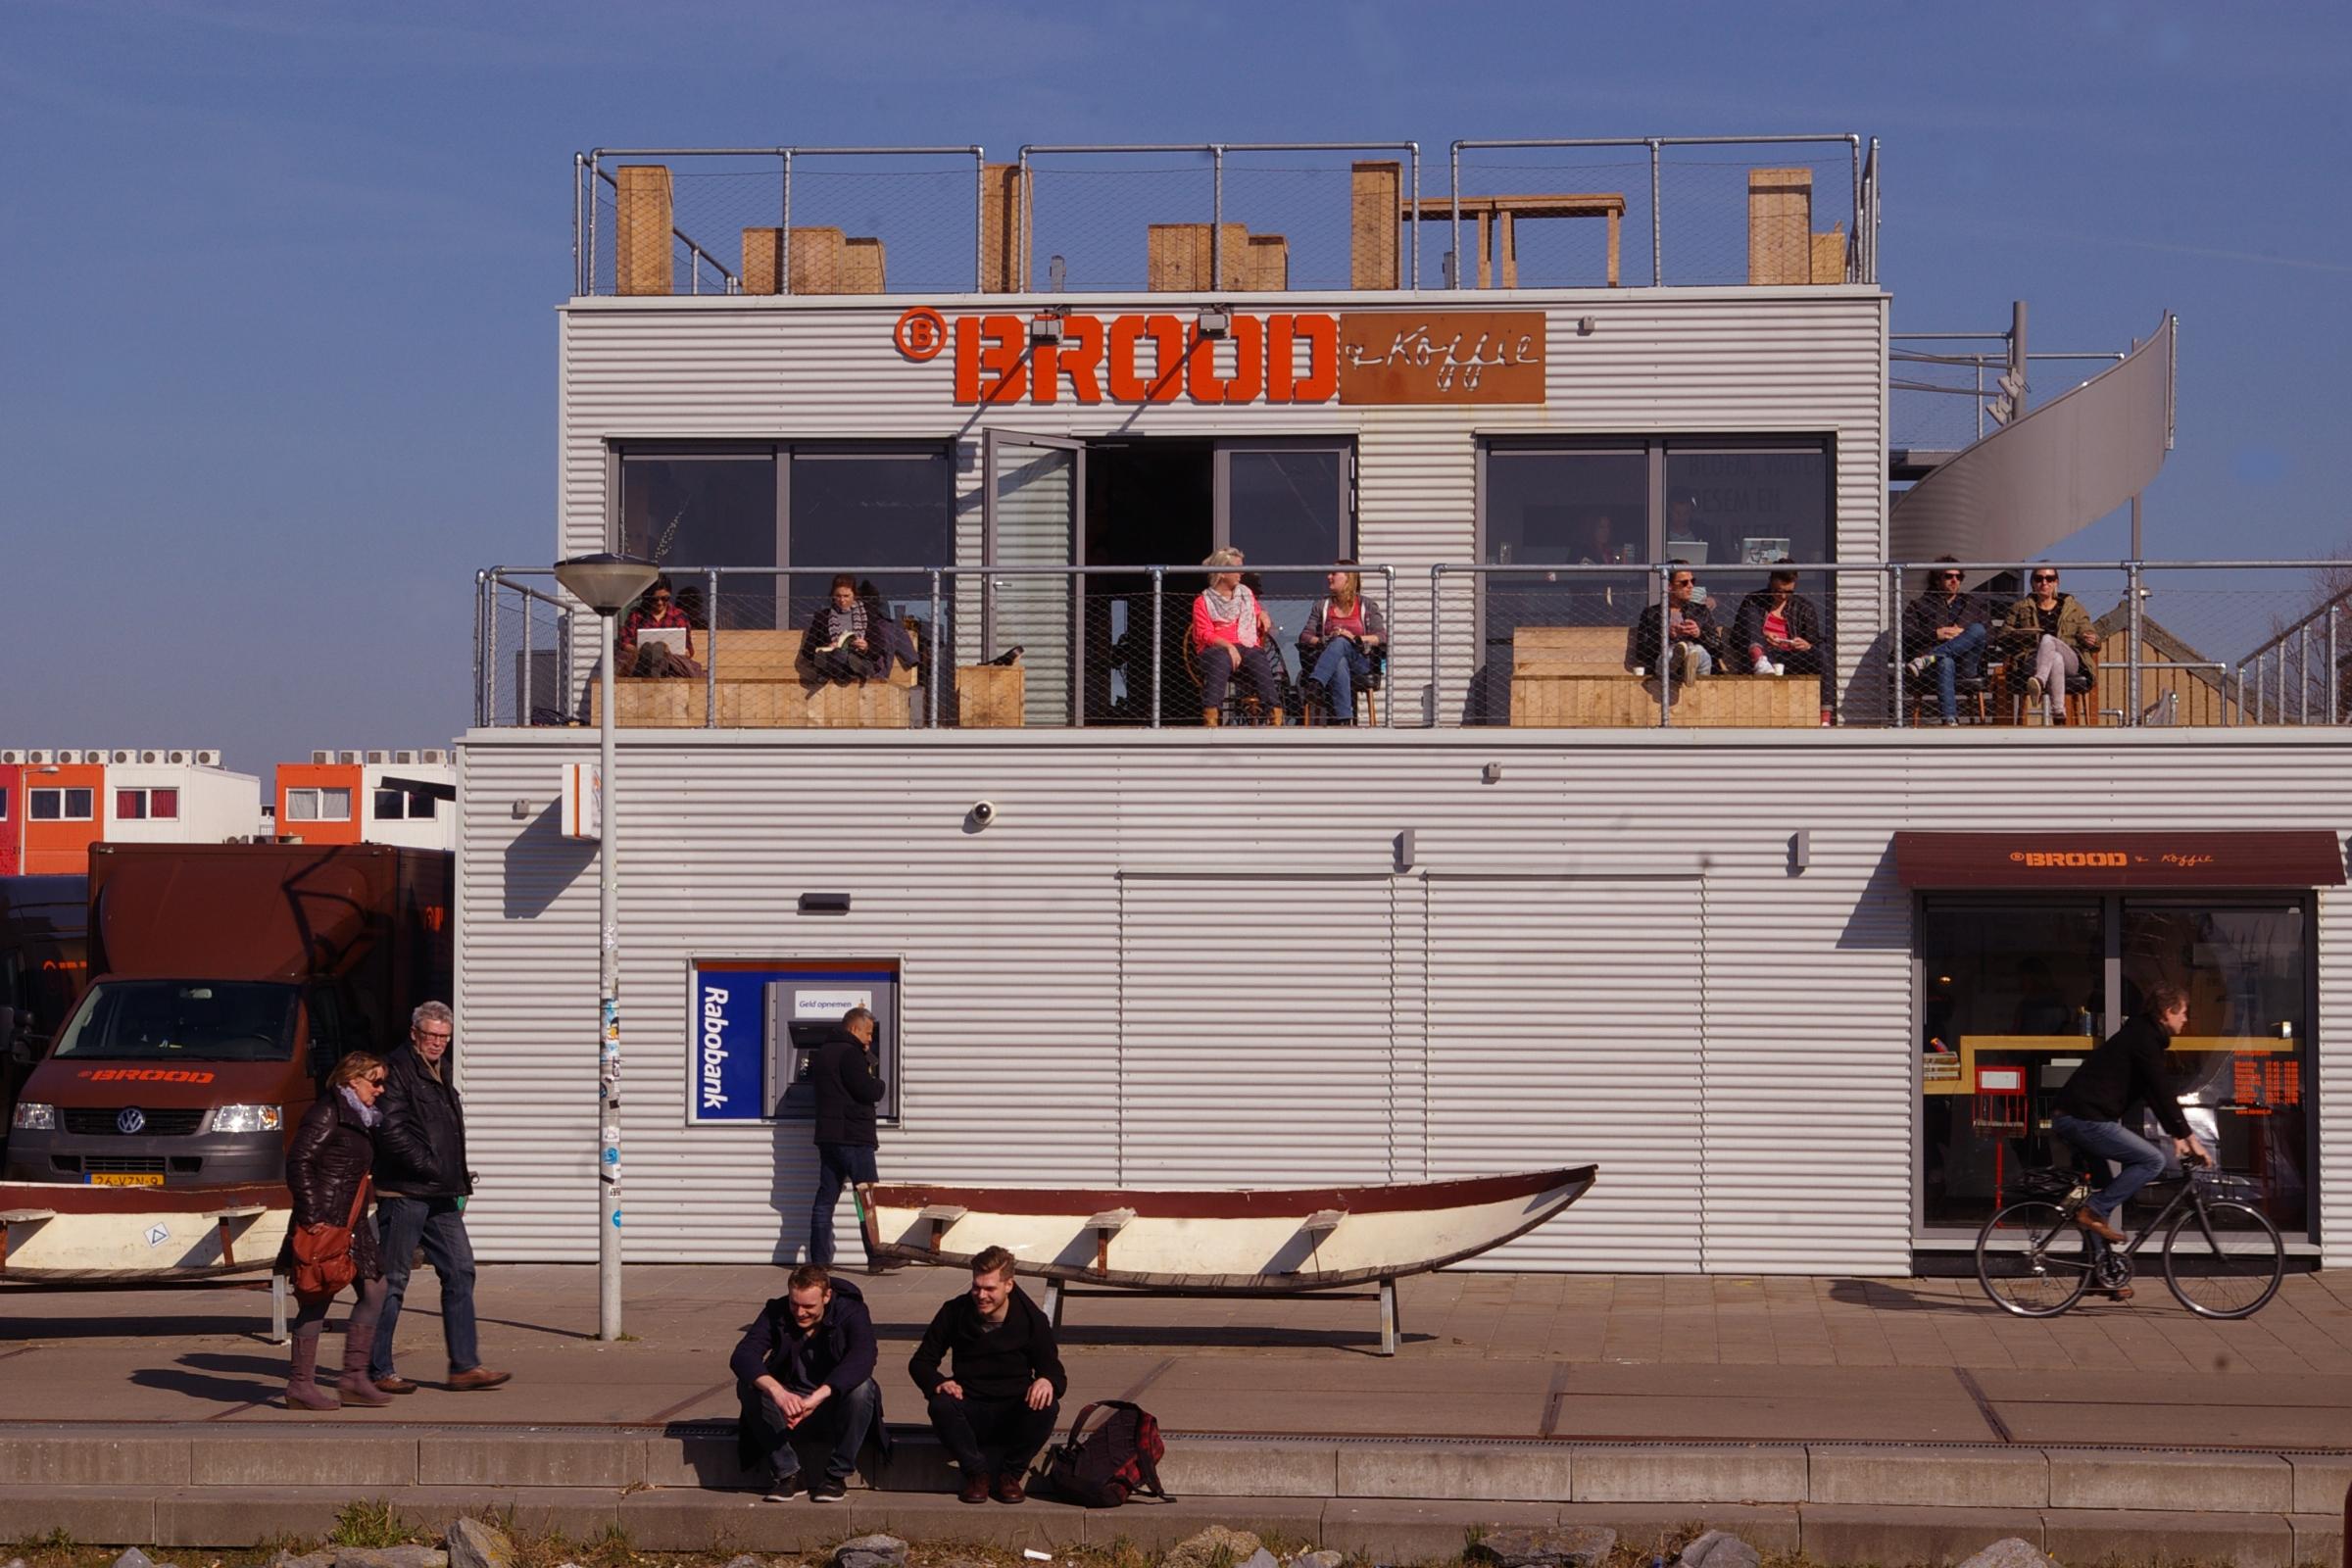 Cover image of this place BBrood & Koffie